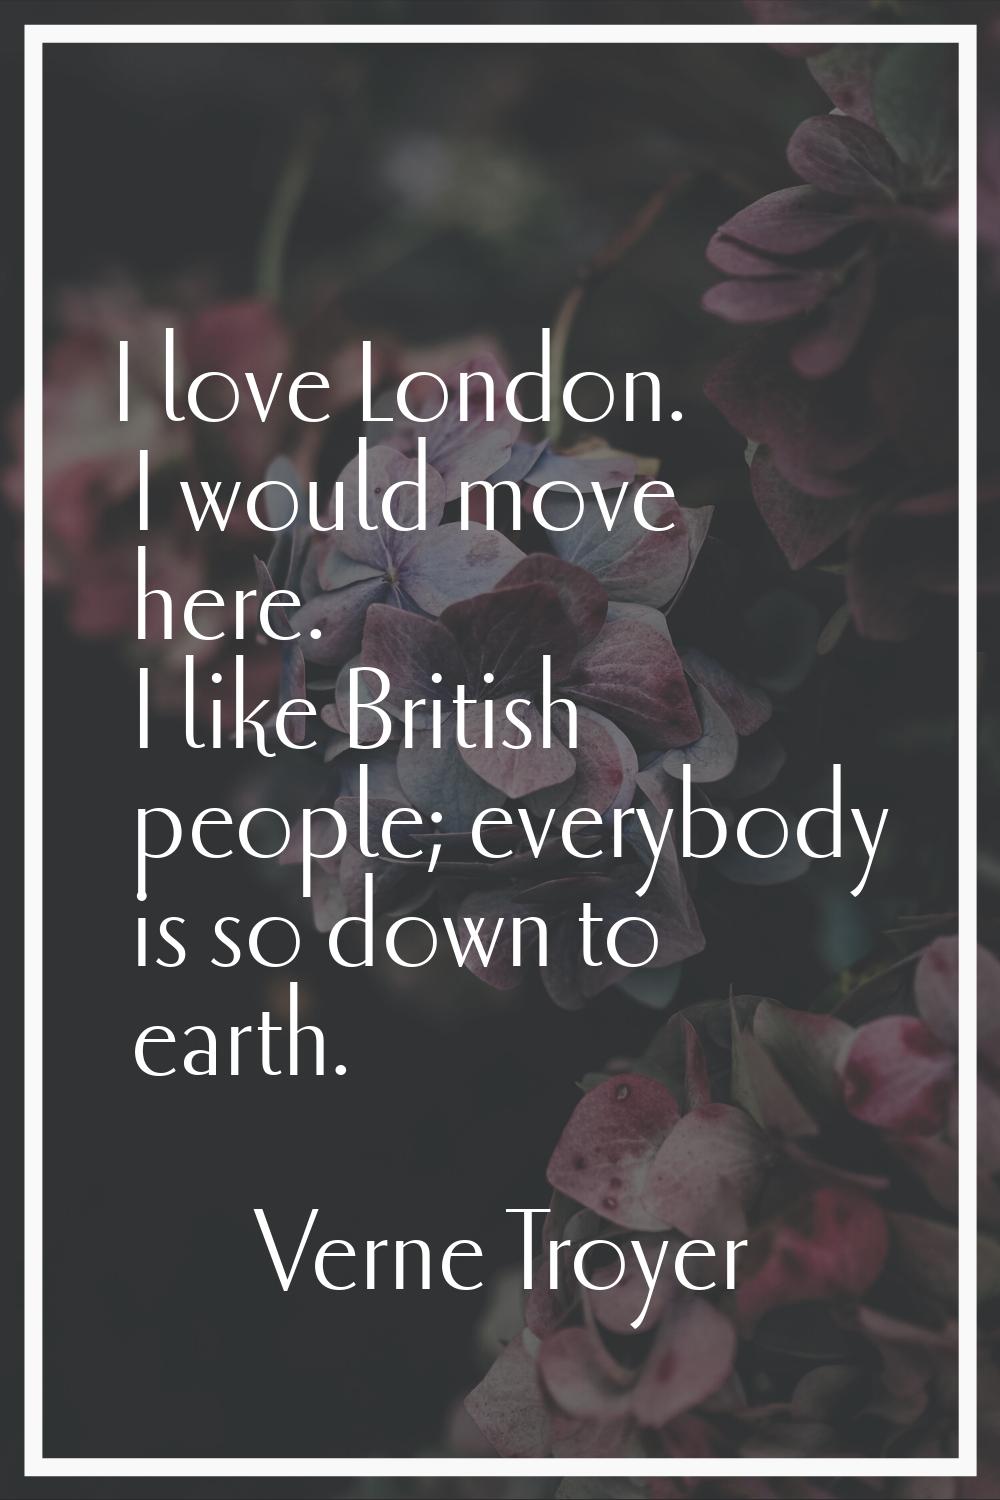 I love London. I would move here. I like British people; everybody is so down to earth.